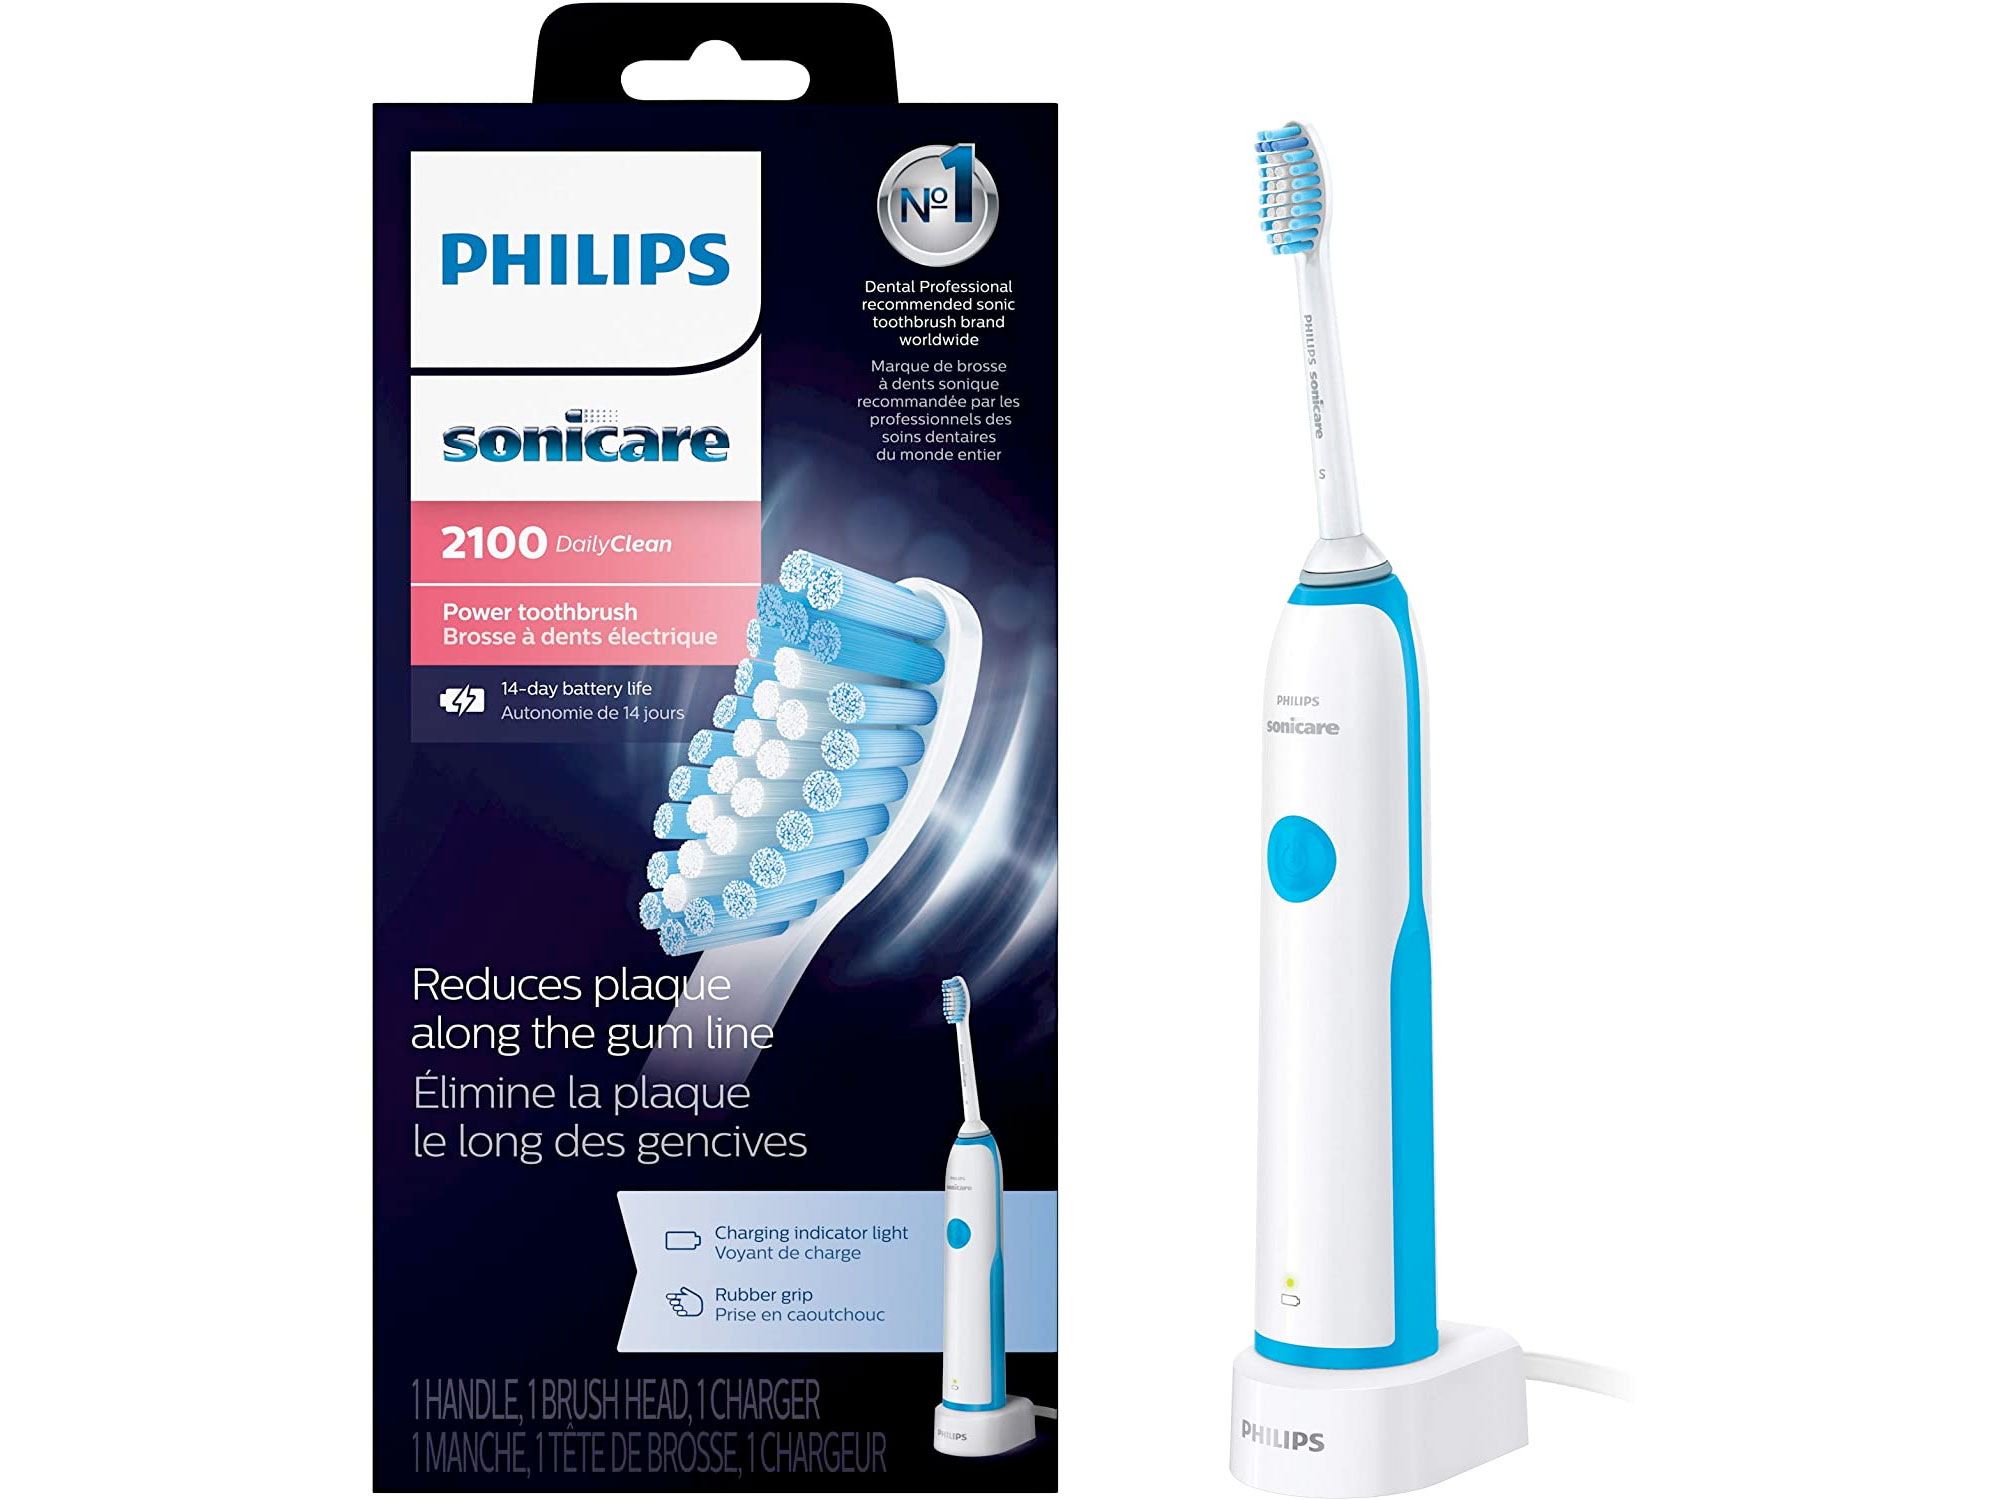 Amazon：Philips Sonicare 2100 DailyClean Rechargeable Electric Toothbrush只賣$24.95